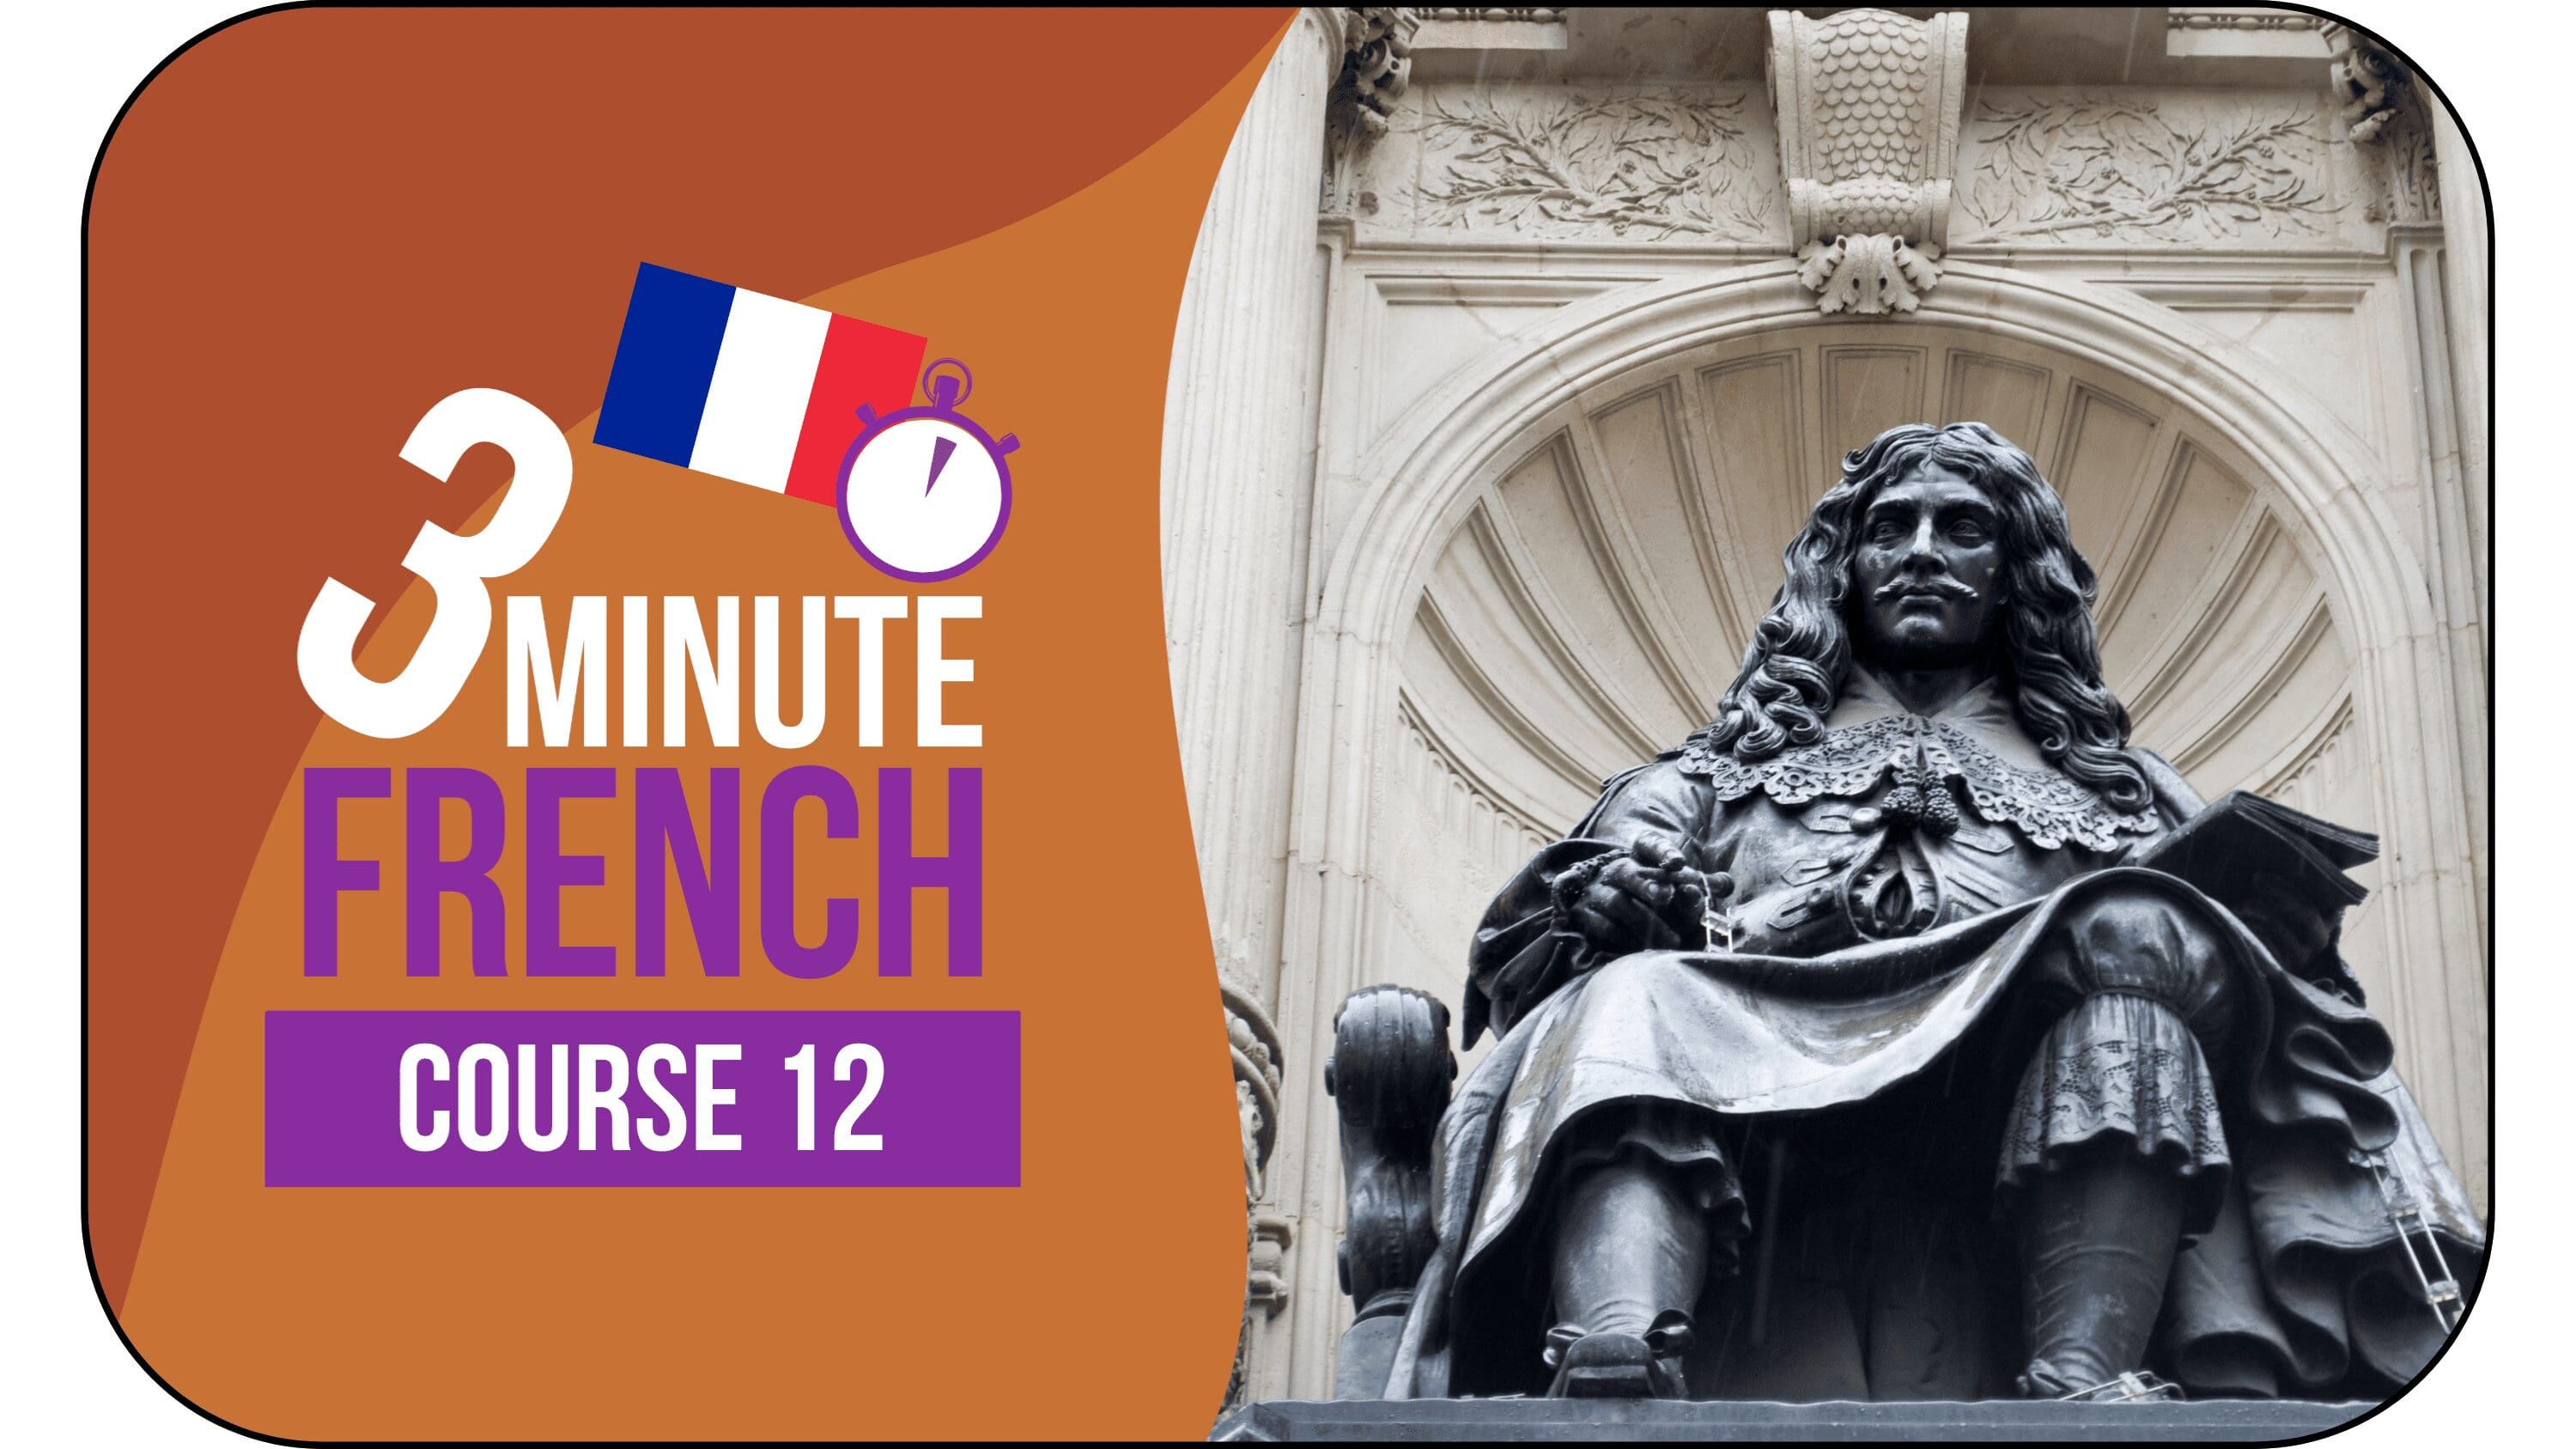 3 Minute French - Course 12